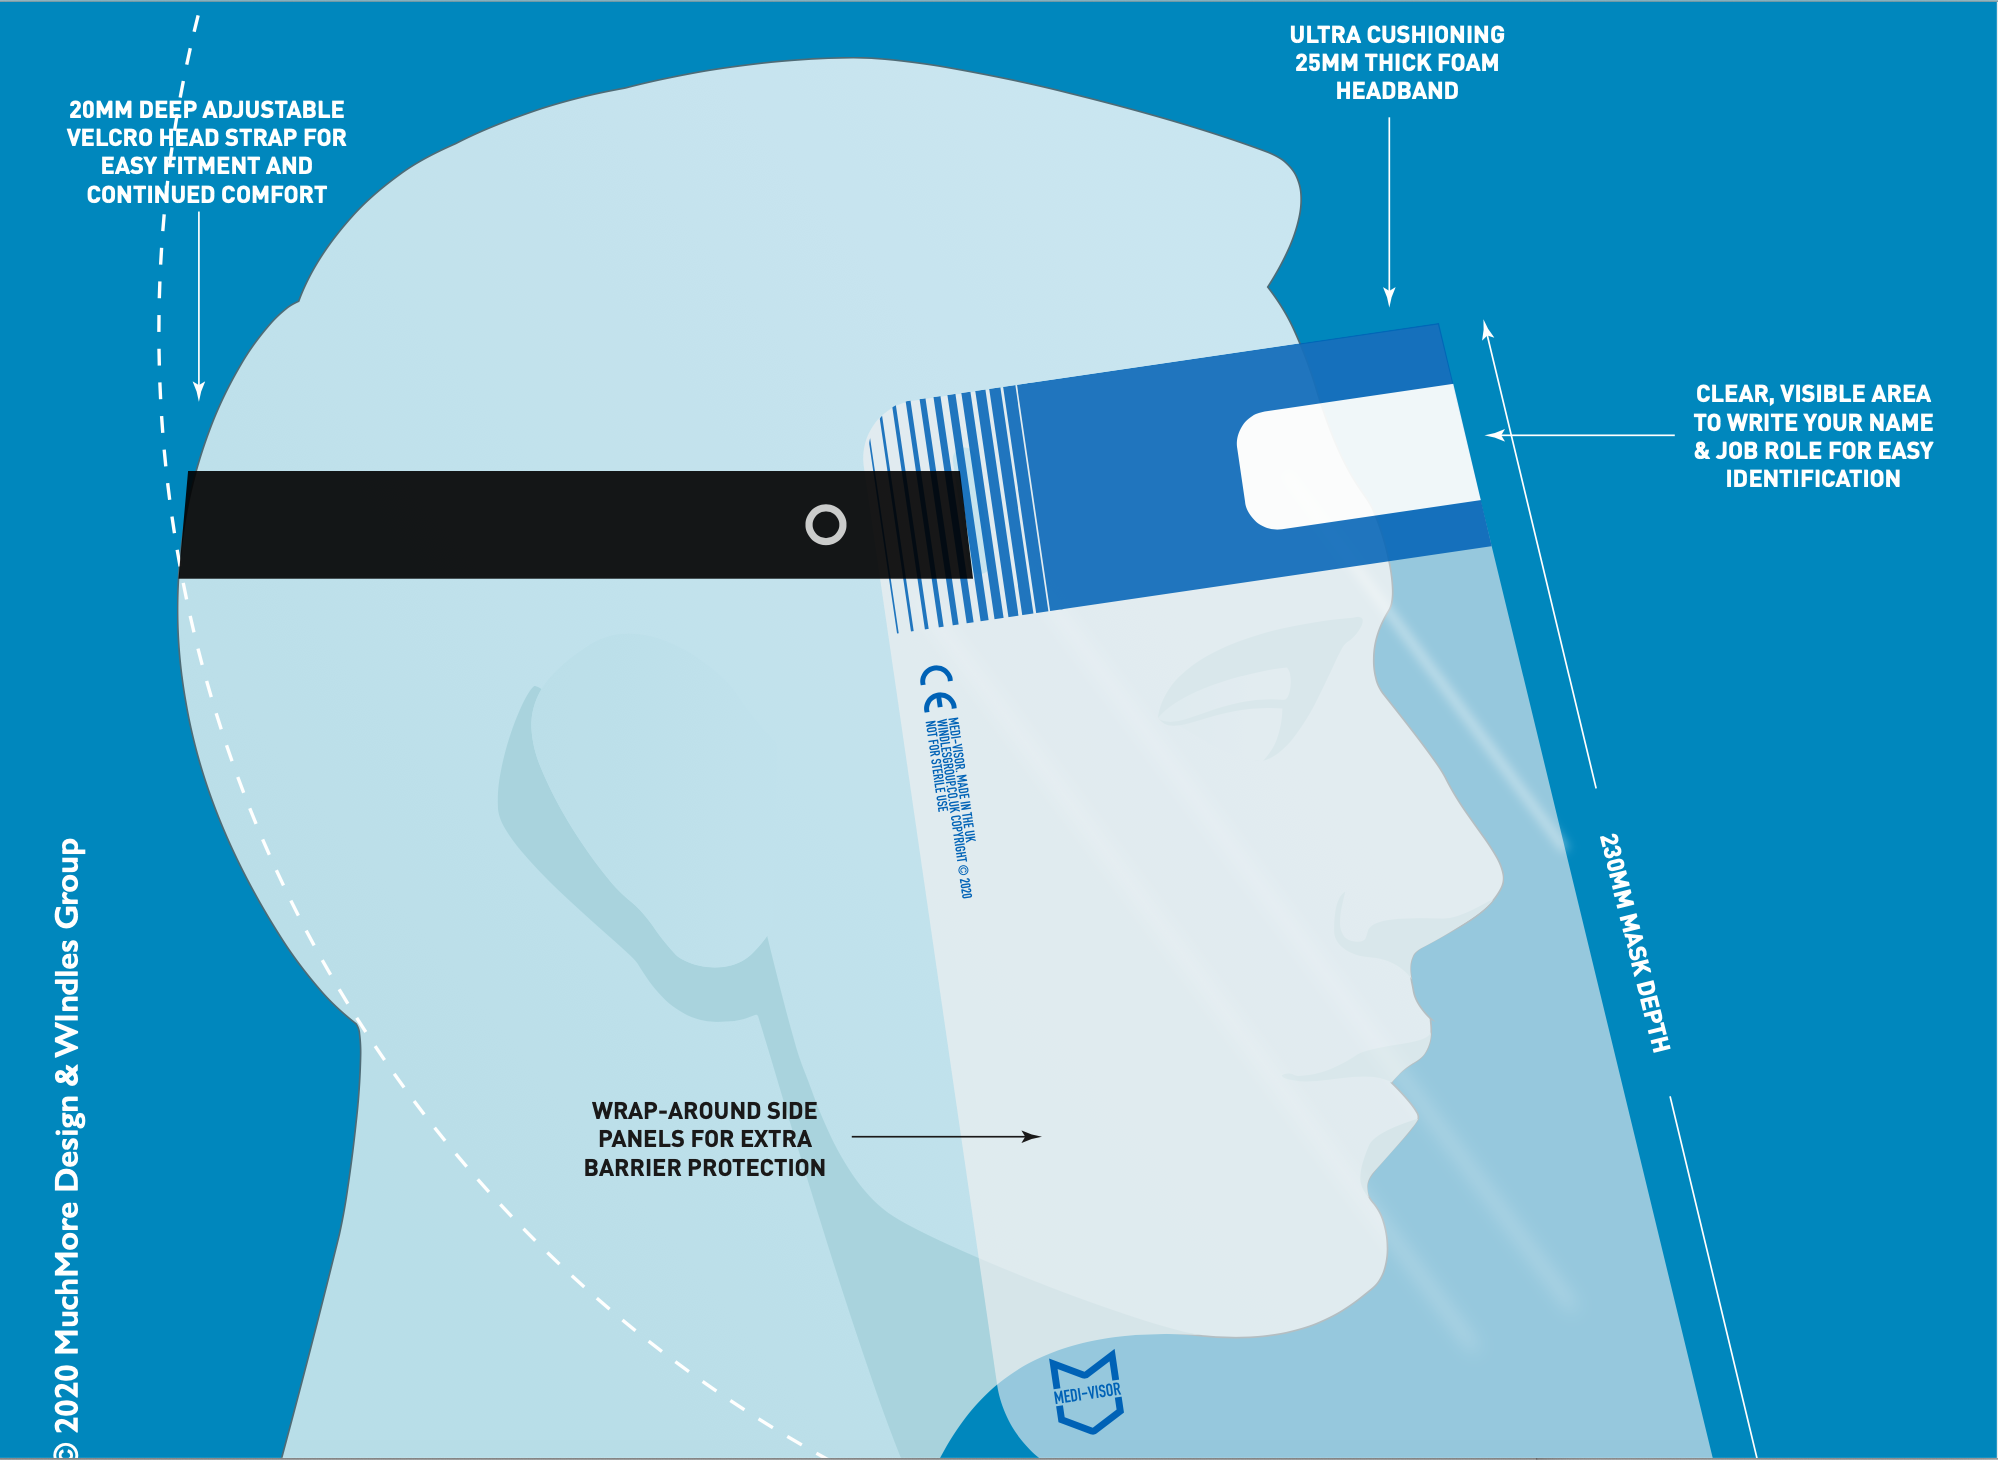 Above: Endorsed by the NHS, the Windles Medi-Visors allow for protection while providing full face visibility, making them suitable for retailers as well as reps, agents and merchandisers in the card industry.